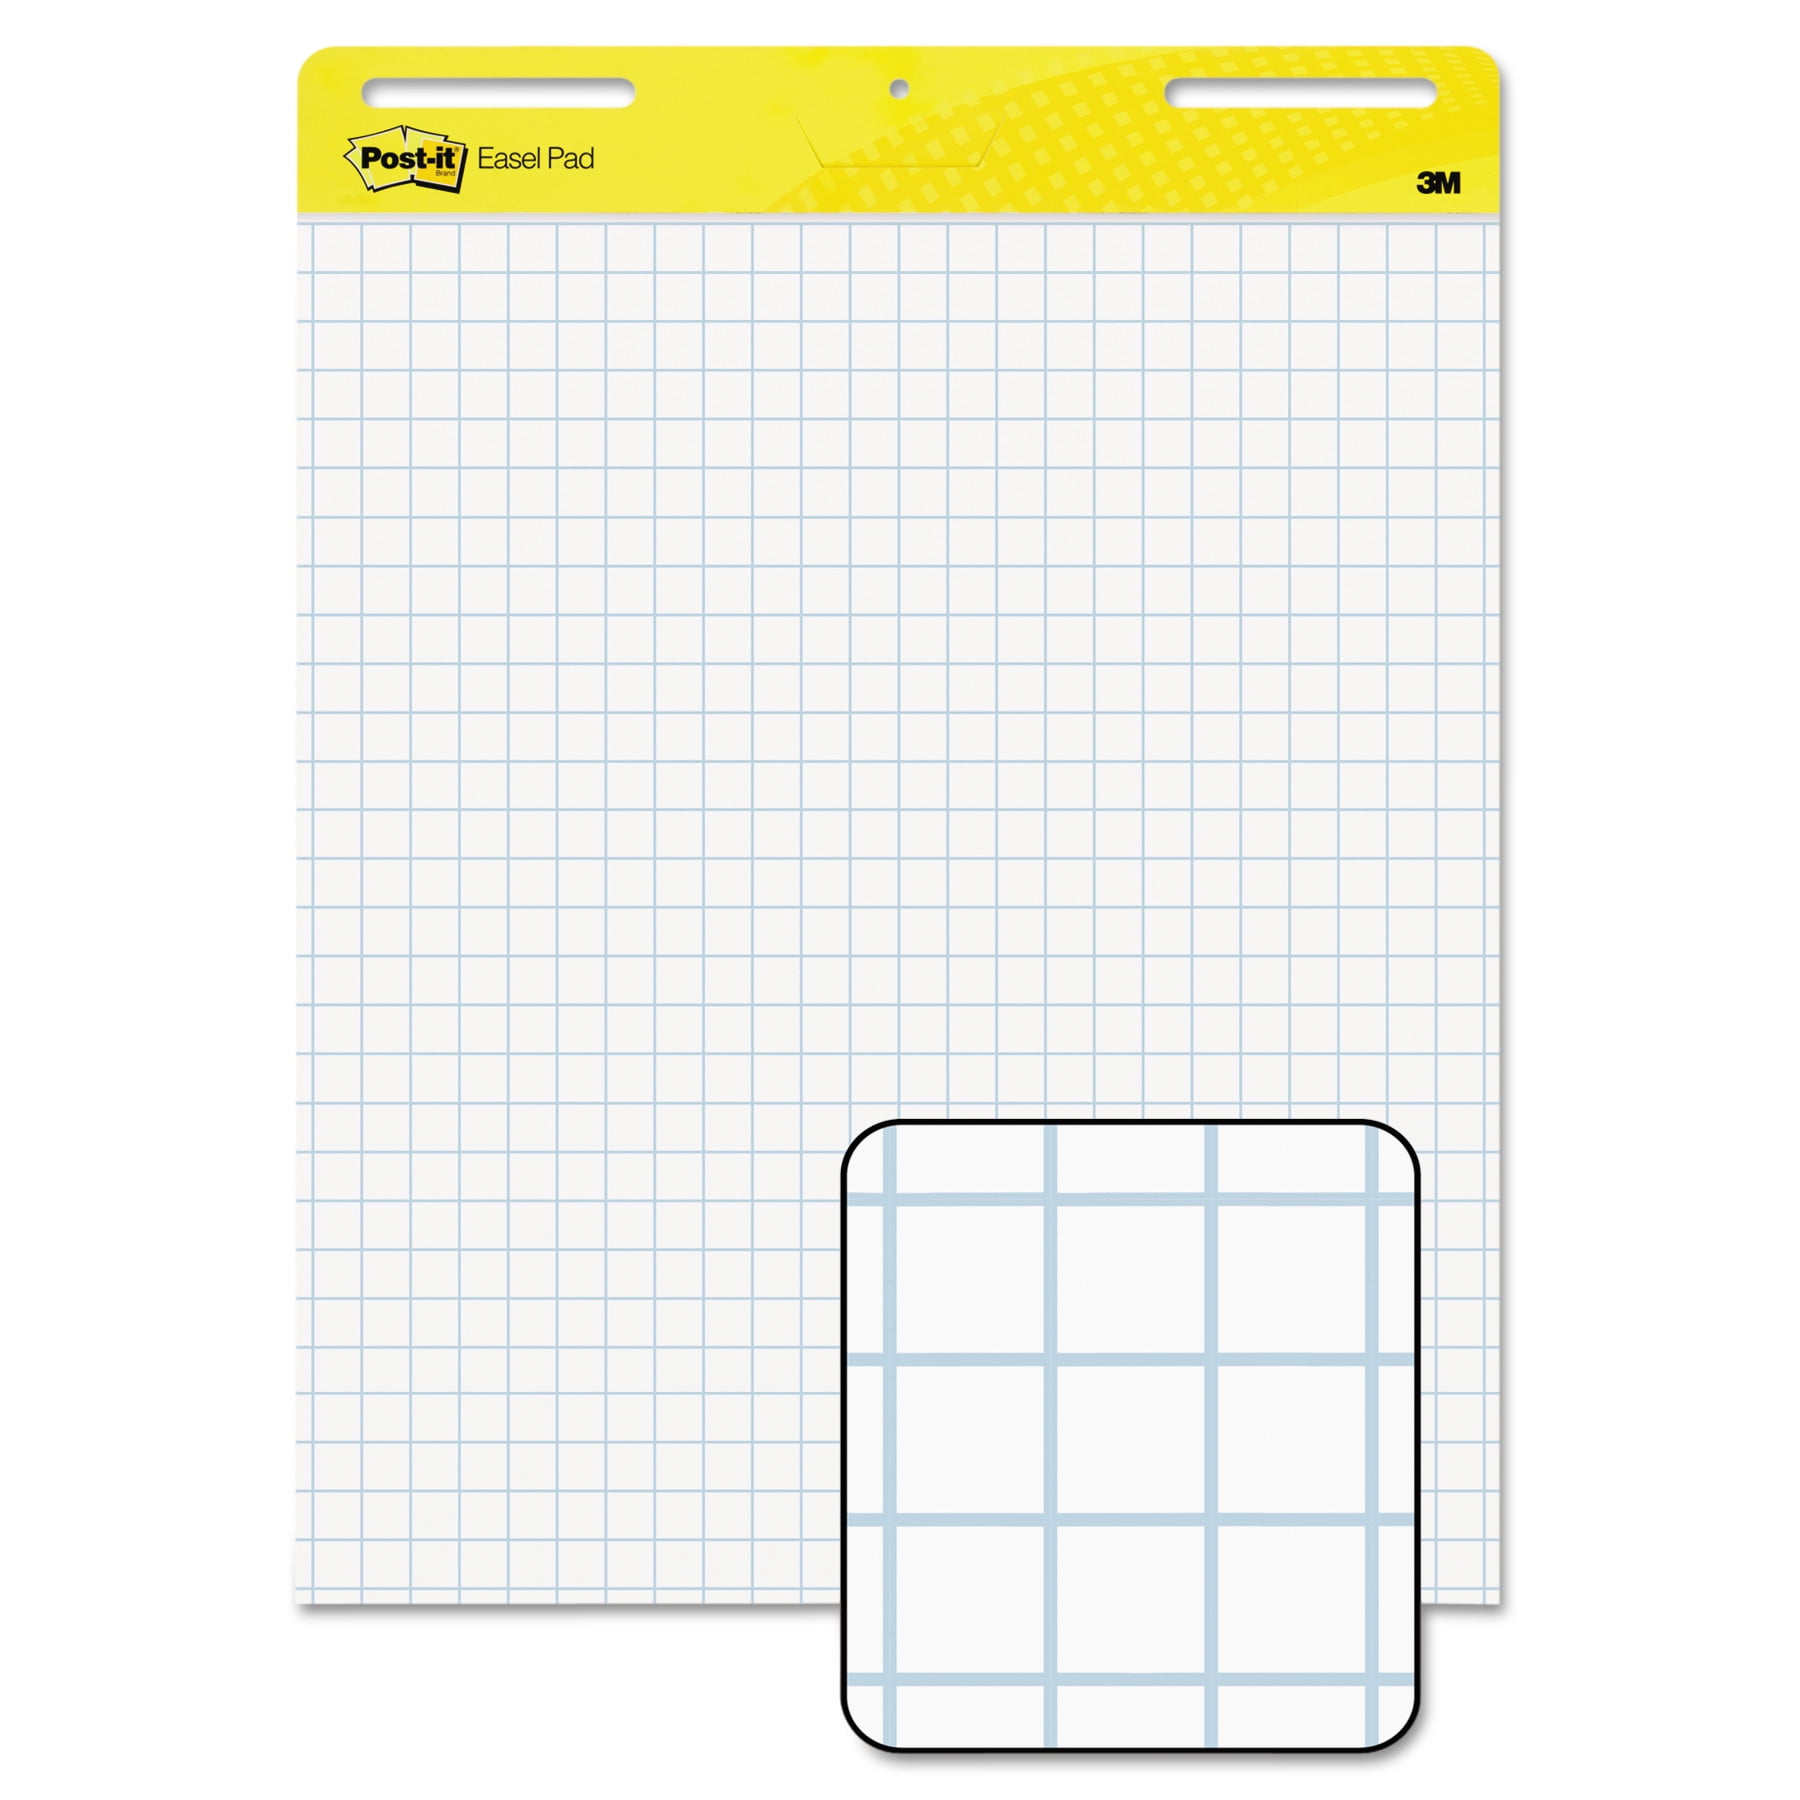 Post-it® Easel Pad - 30 Sheets - Ruled25 x 30 - Self-stick, Resist  Bleed-through, Handle, Sturdy Backcard, Universal Slot, Repositionable,  Adhesive Backing - 6 / Carton - R&A Office Supplies